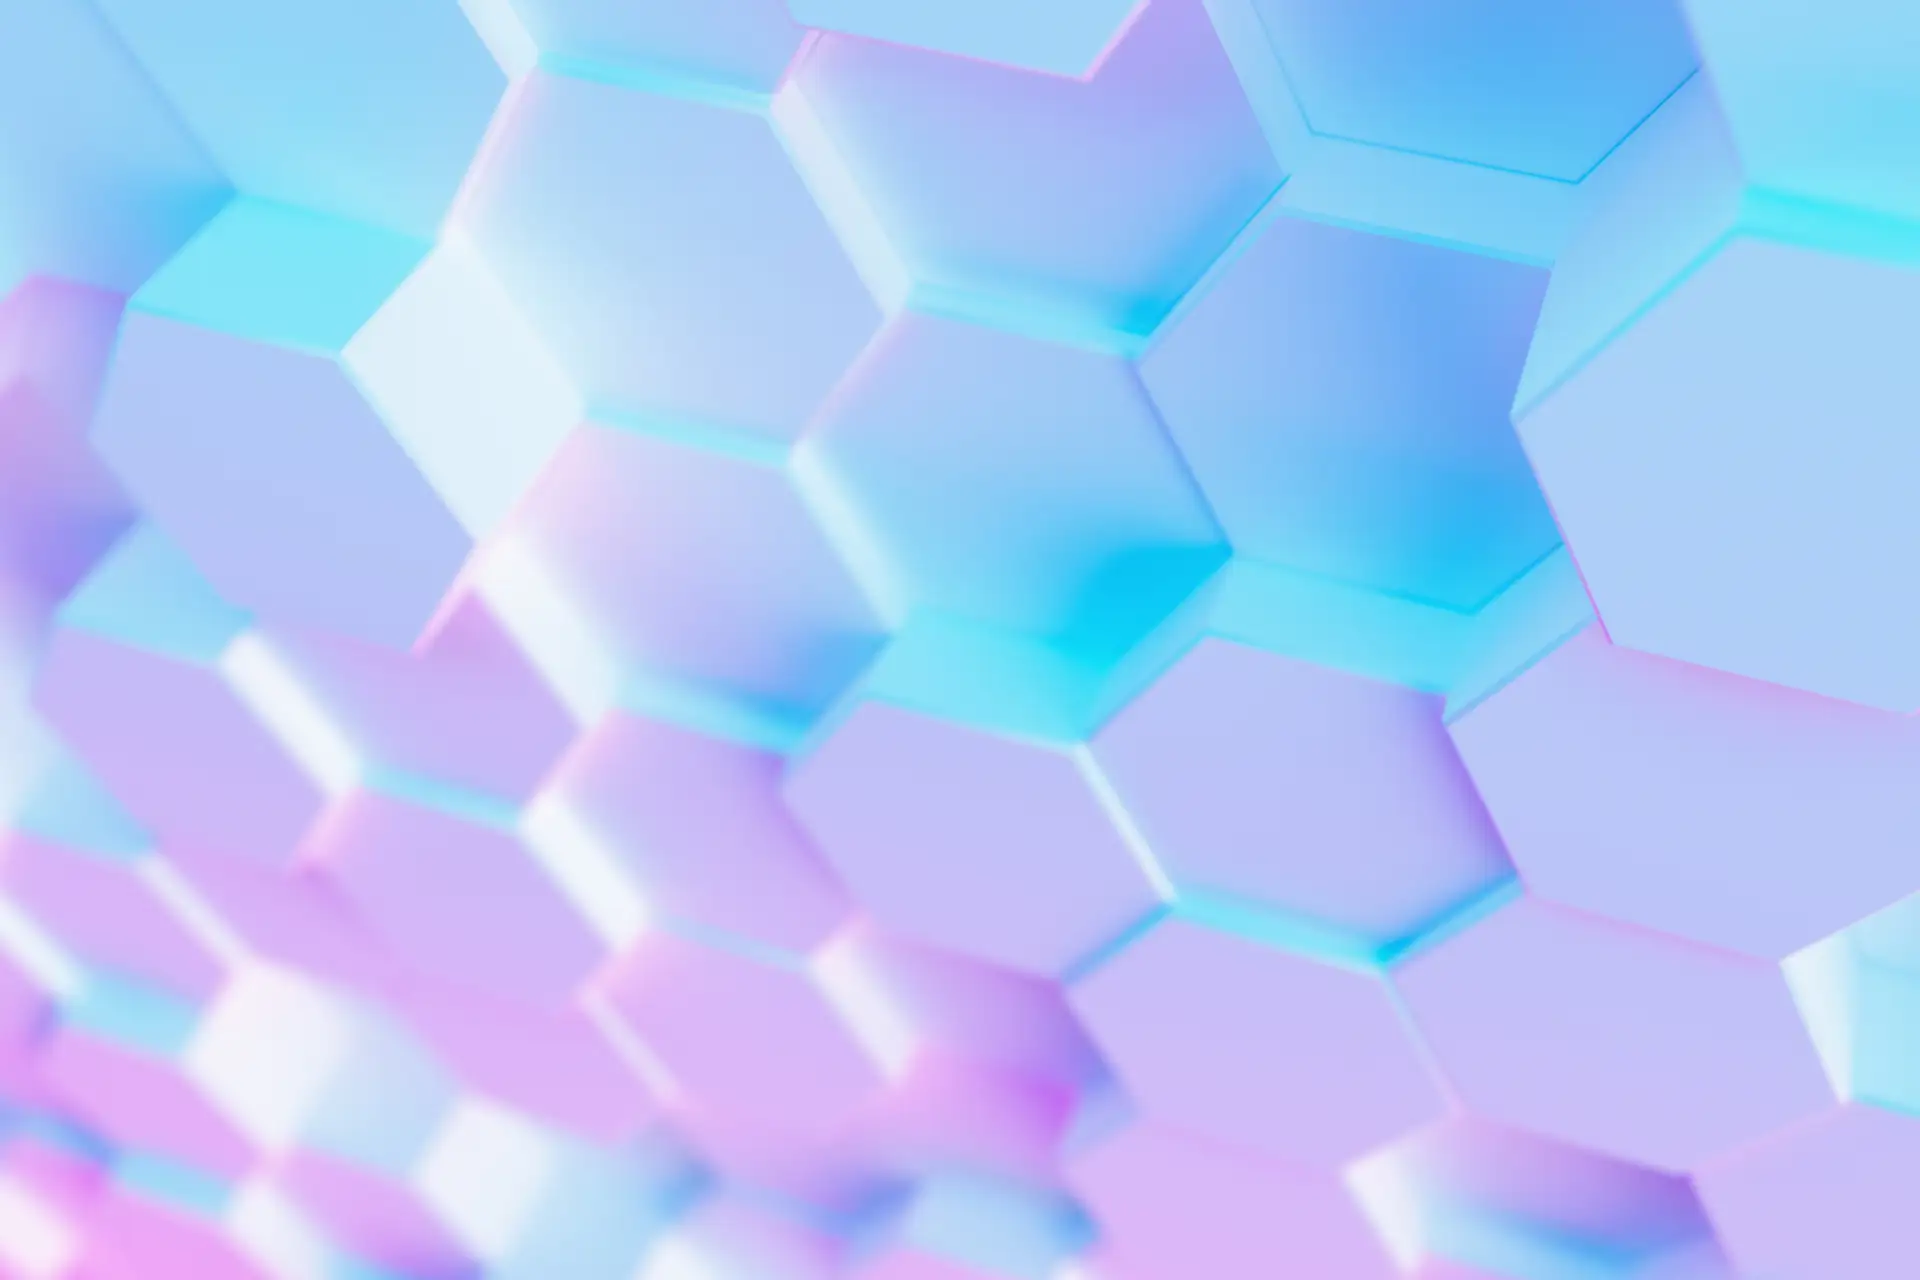 Neon pink and blue gradient on geometric honeycomb shapes